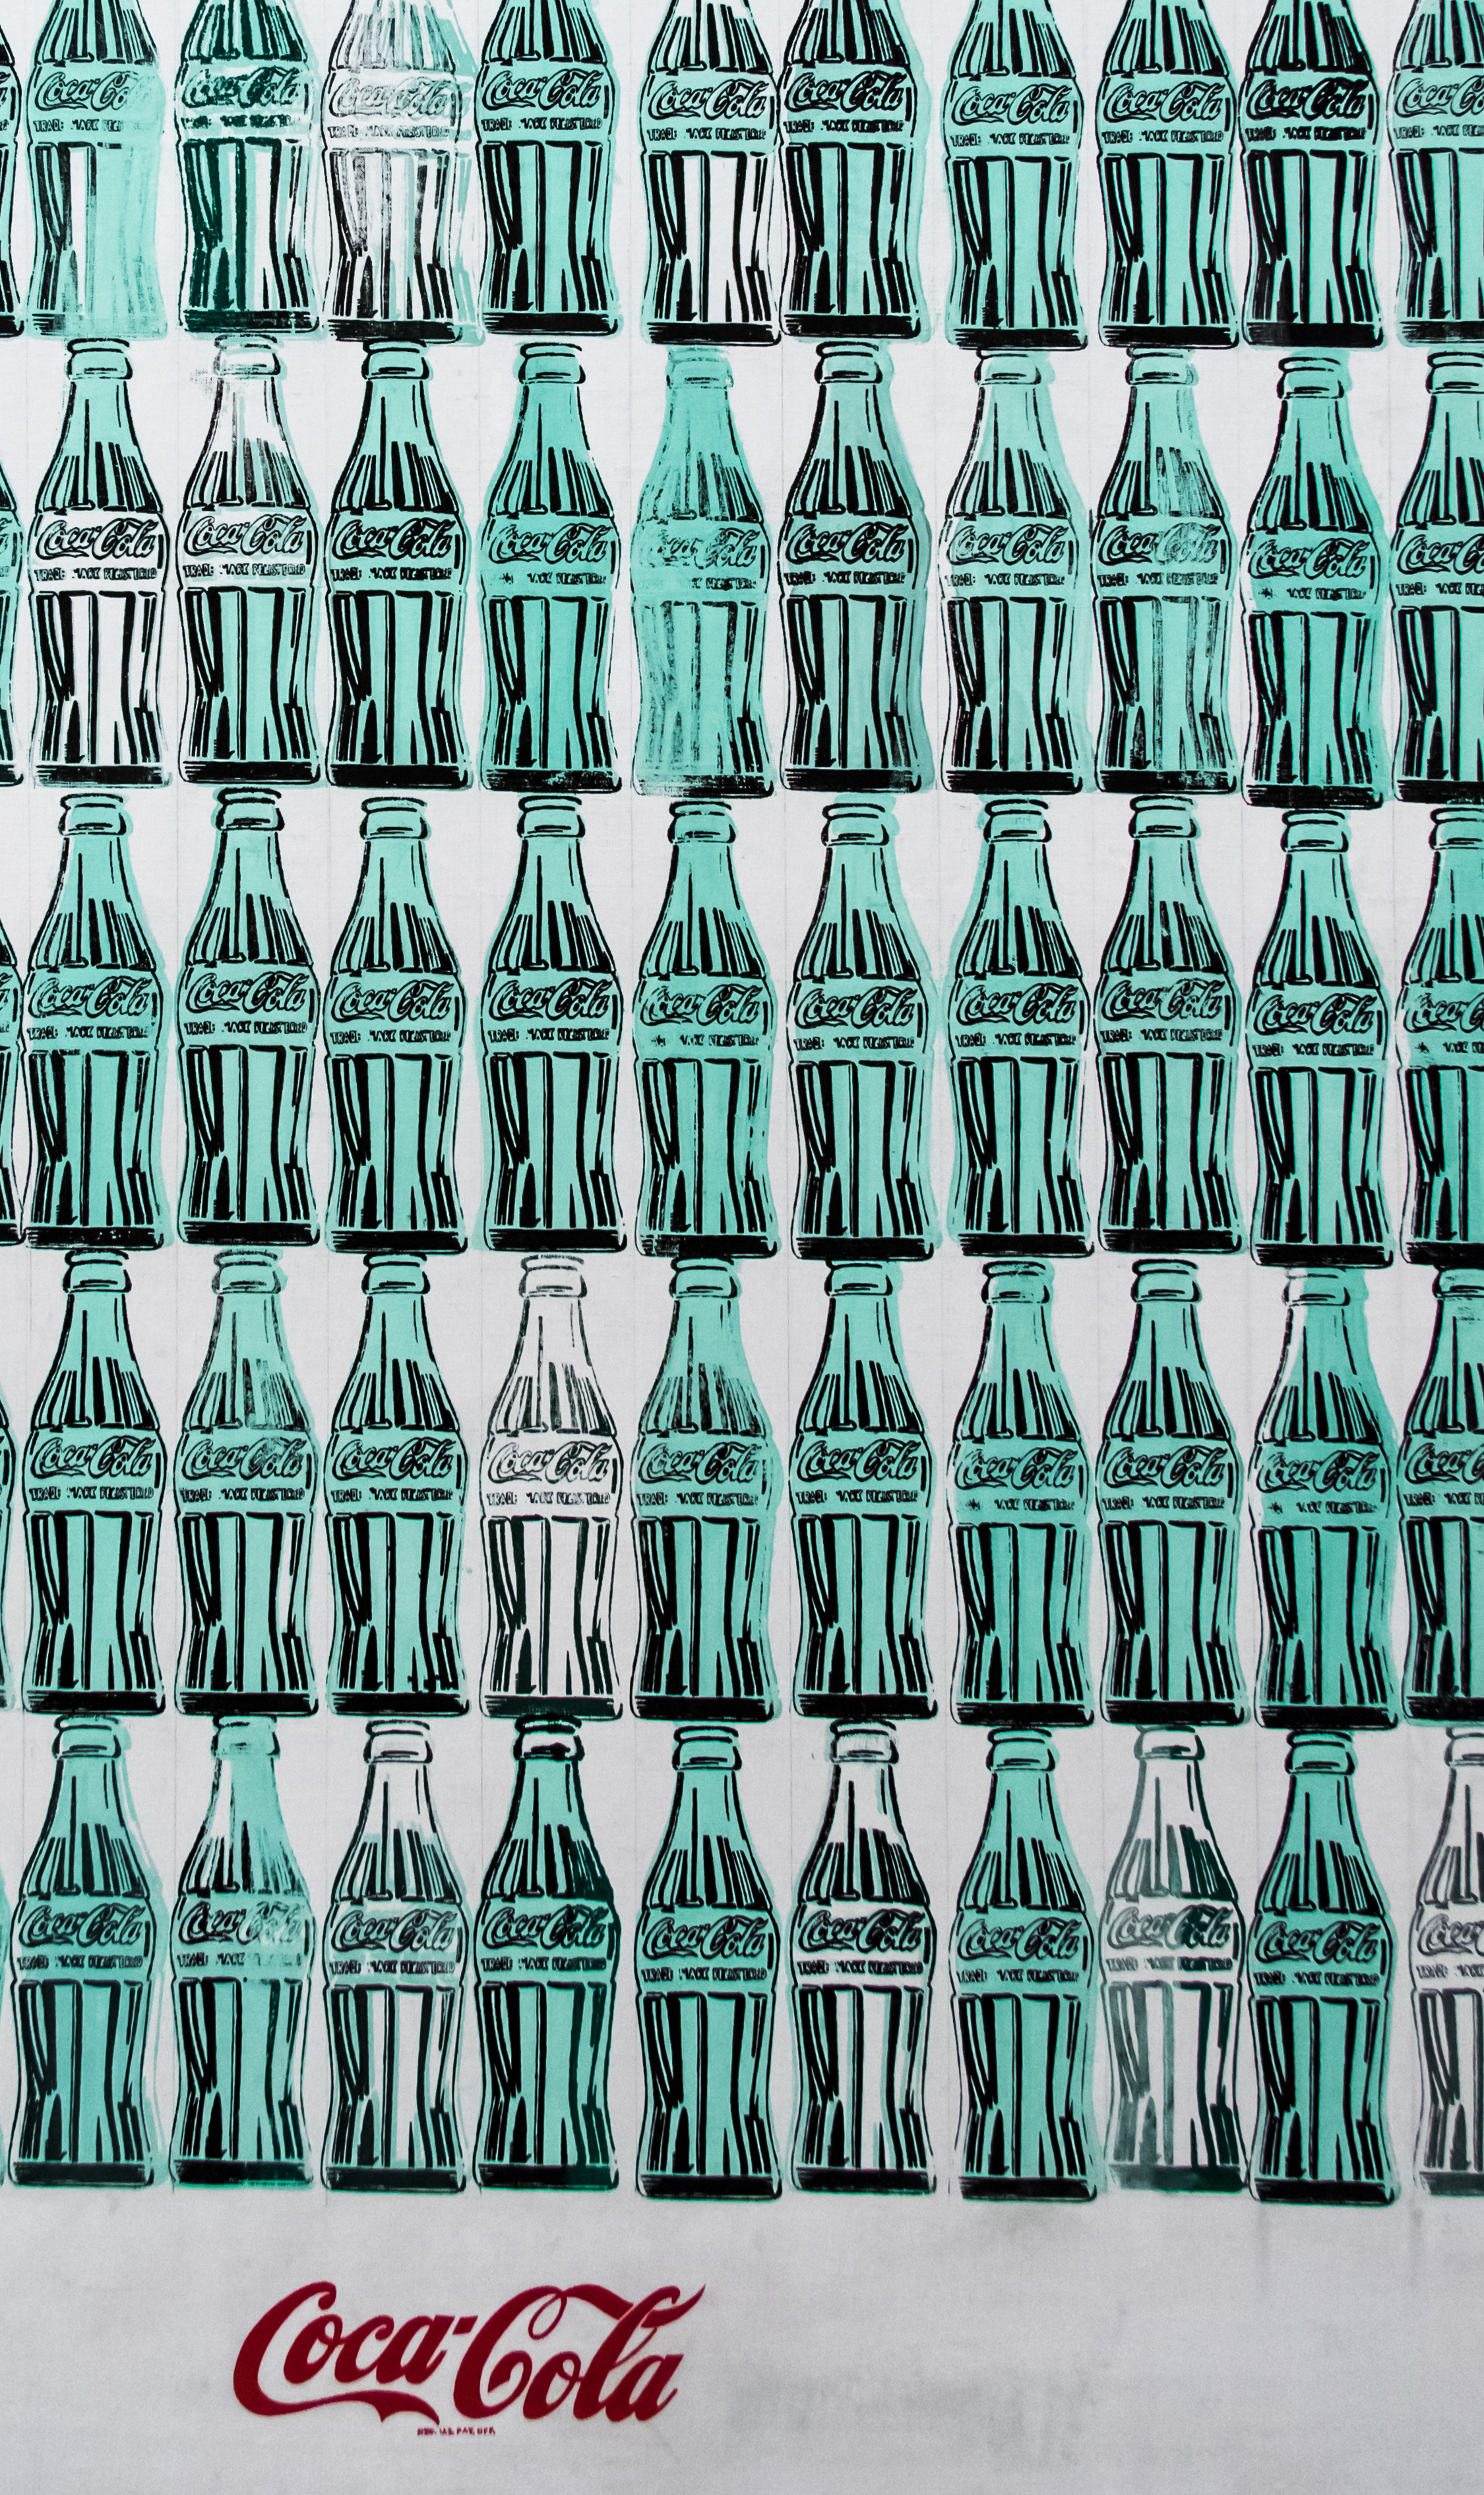 Green Coca Cola Bottles (1962) by Andy Warhol, image via Andrew Moore